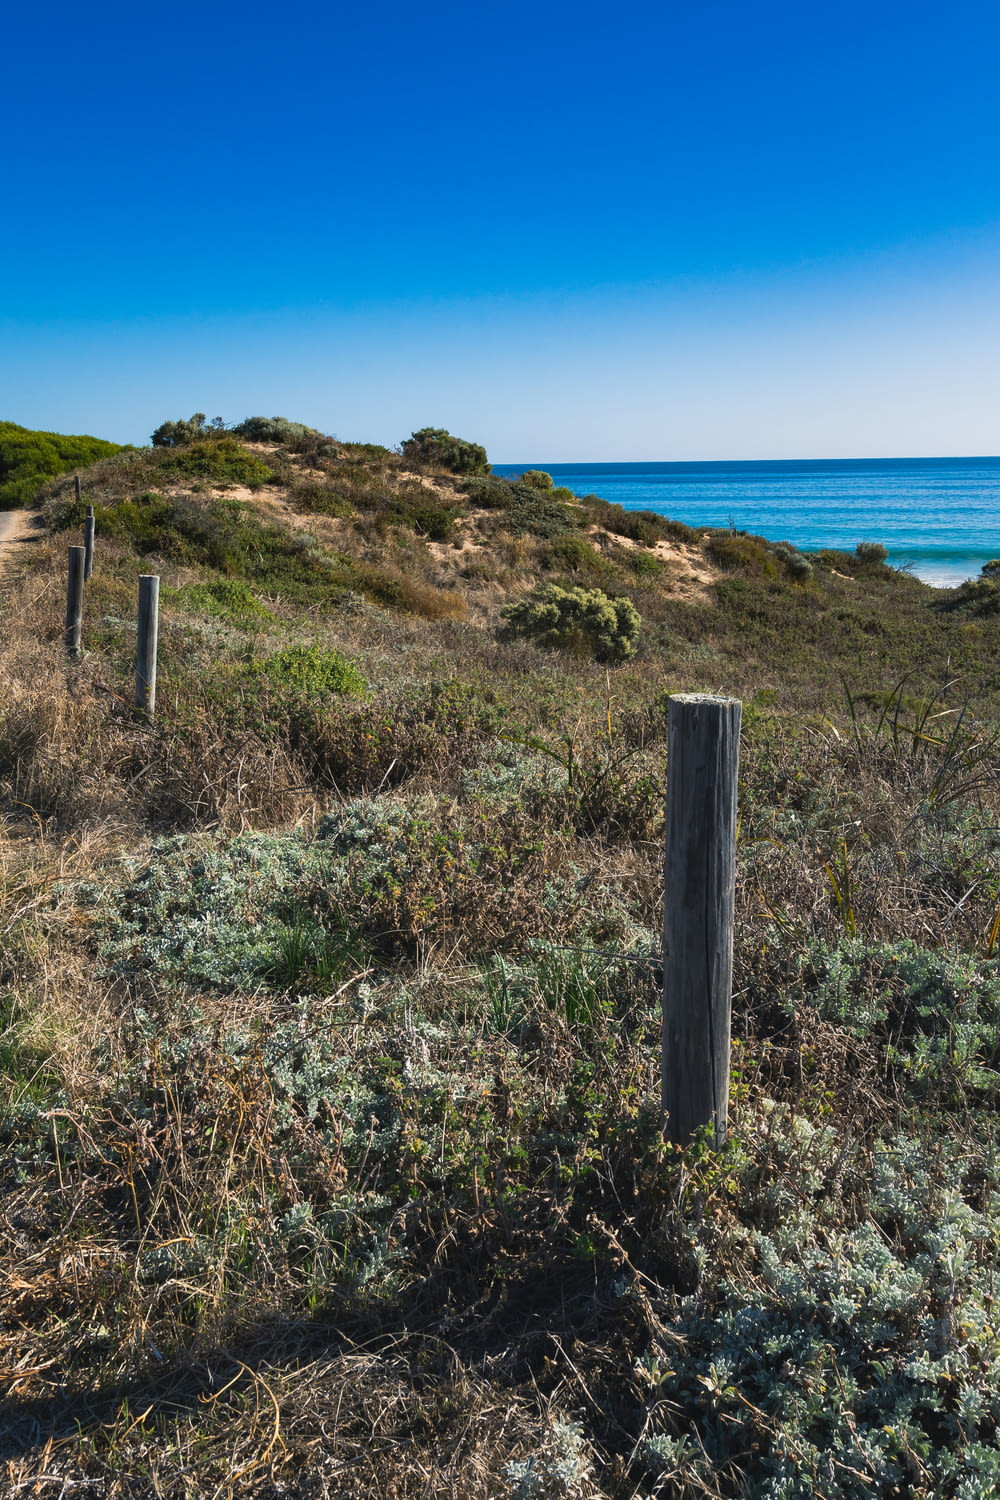 a wooden post in a grassy field next to the ocean